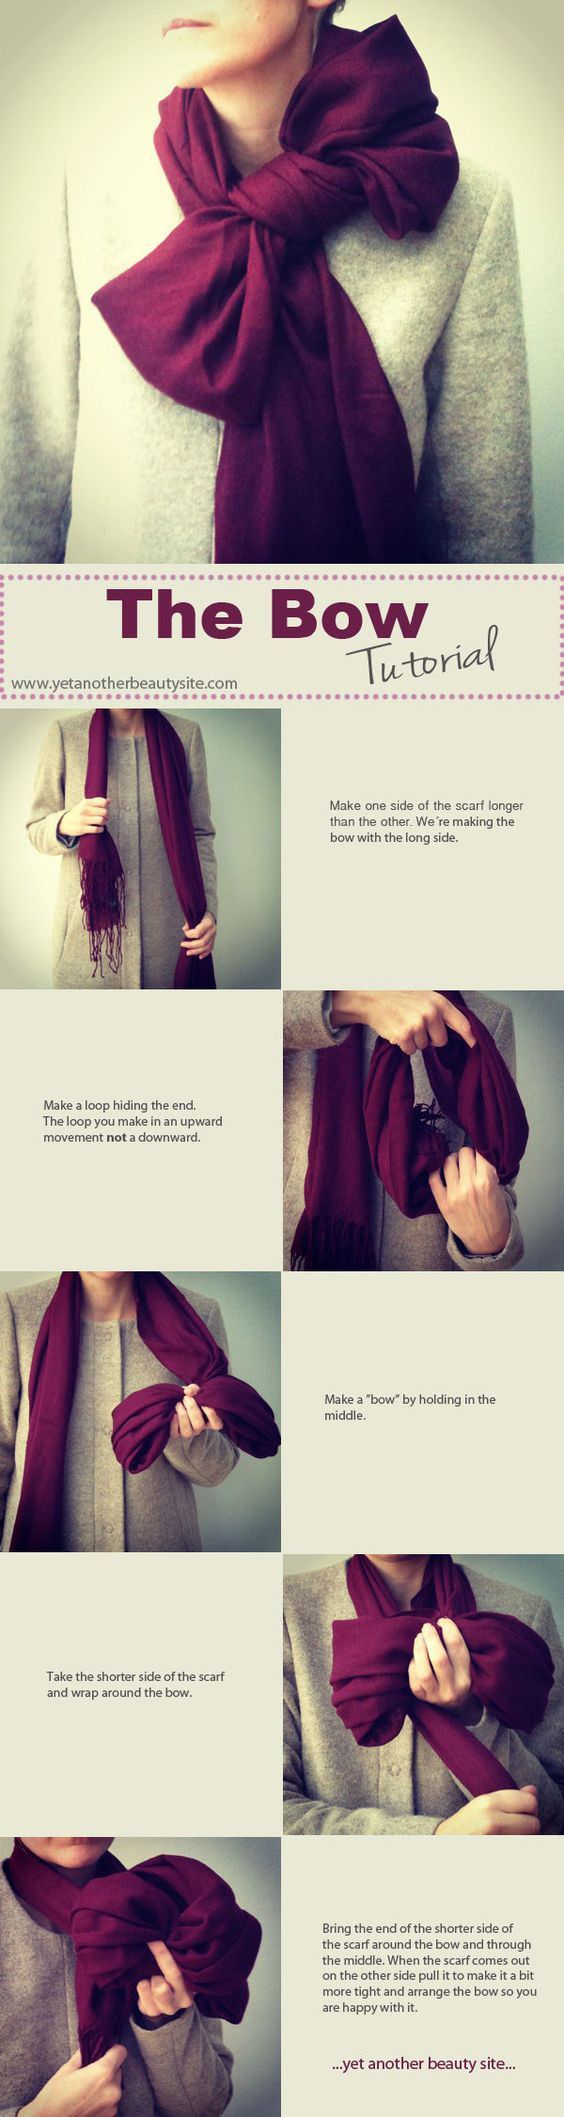 Don’t get caught wearing your scarf the same way every day this winter. Here are 7 different ways to wear a scarf and switch things up.